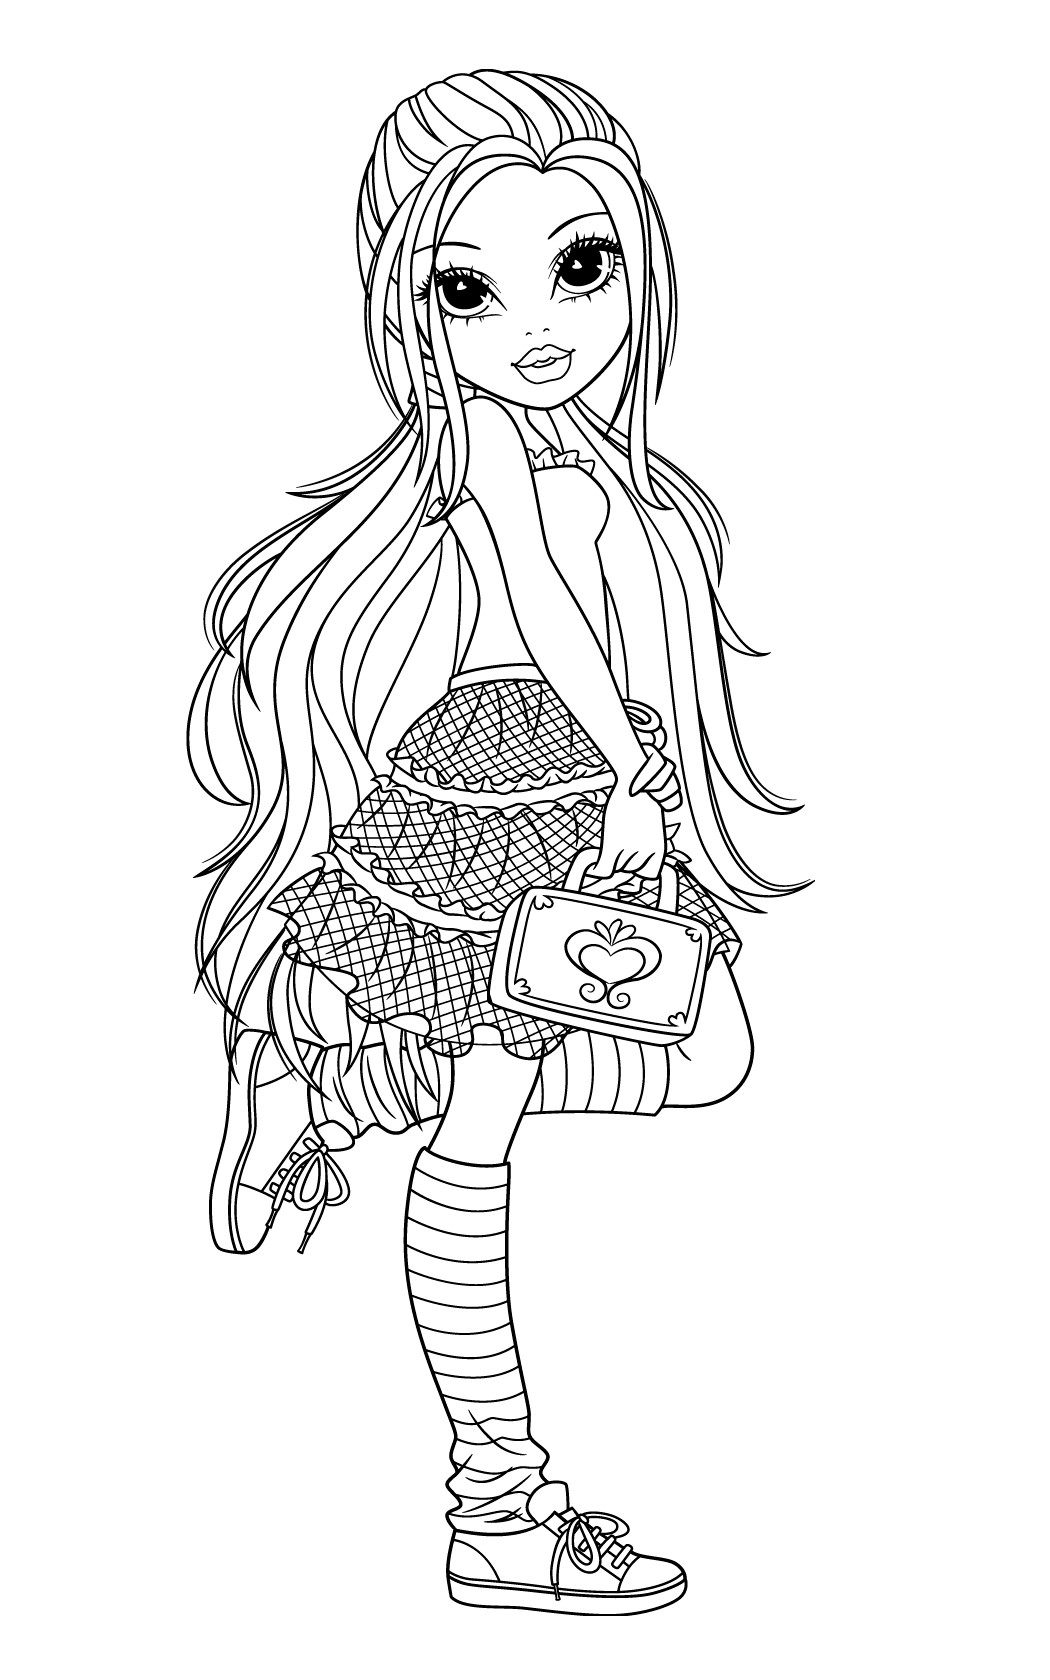 Coloring Pages Girls
 New Moxie Girlz Coloring Pages will be added frequently so